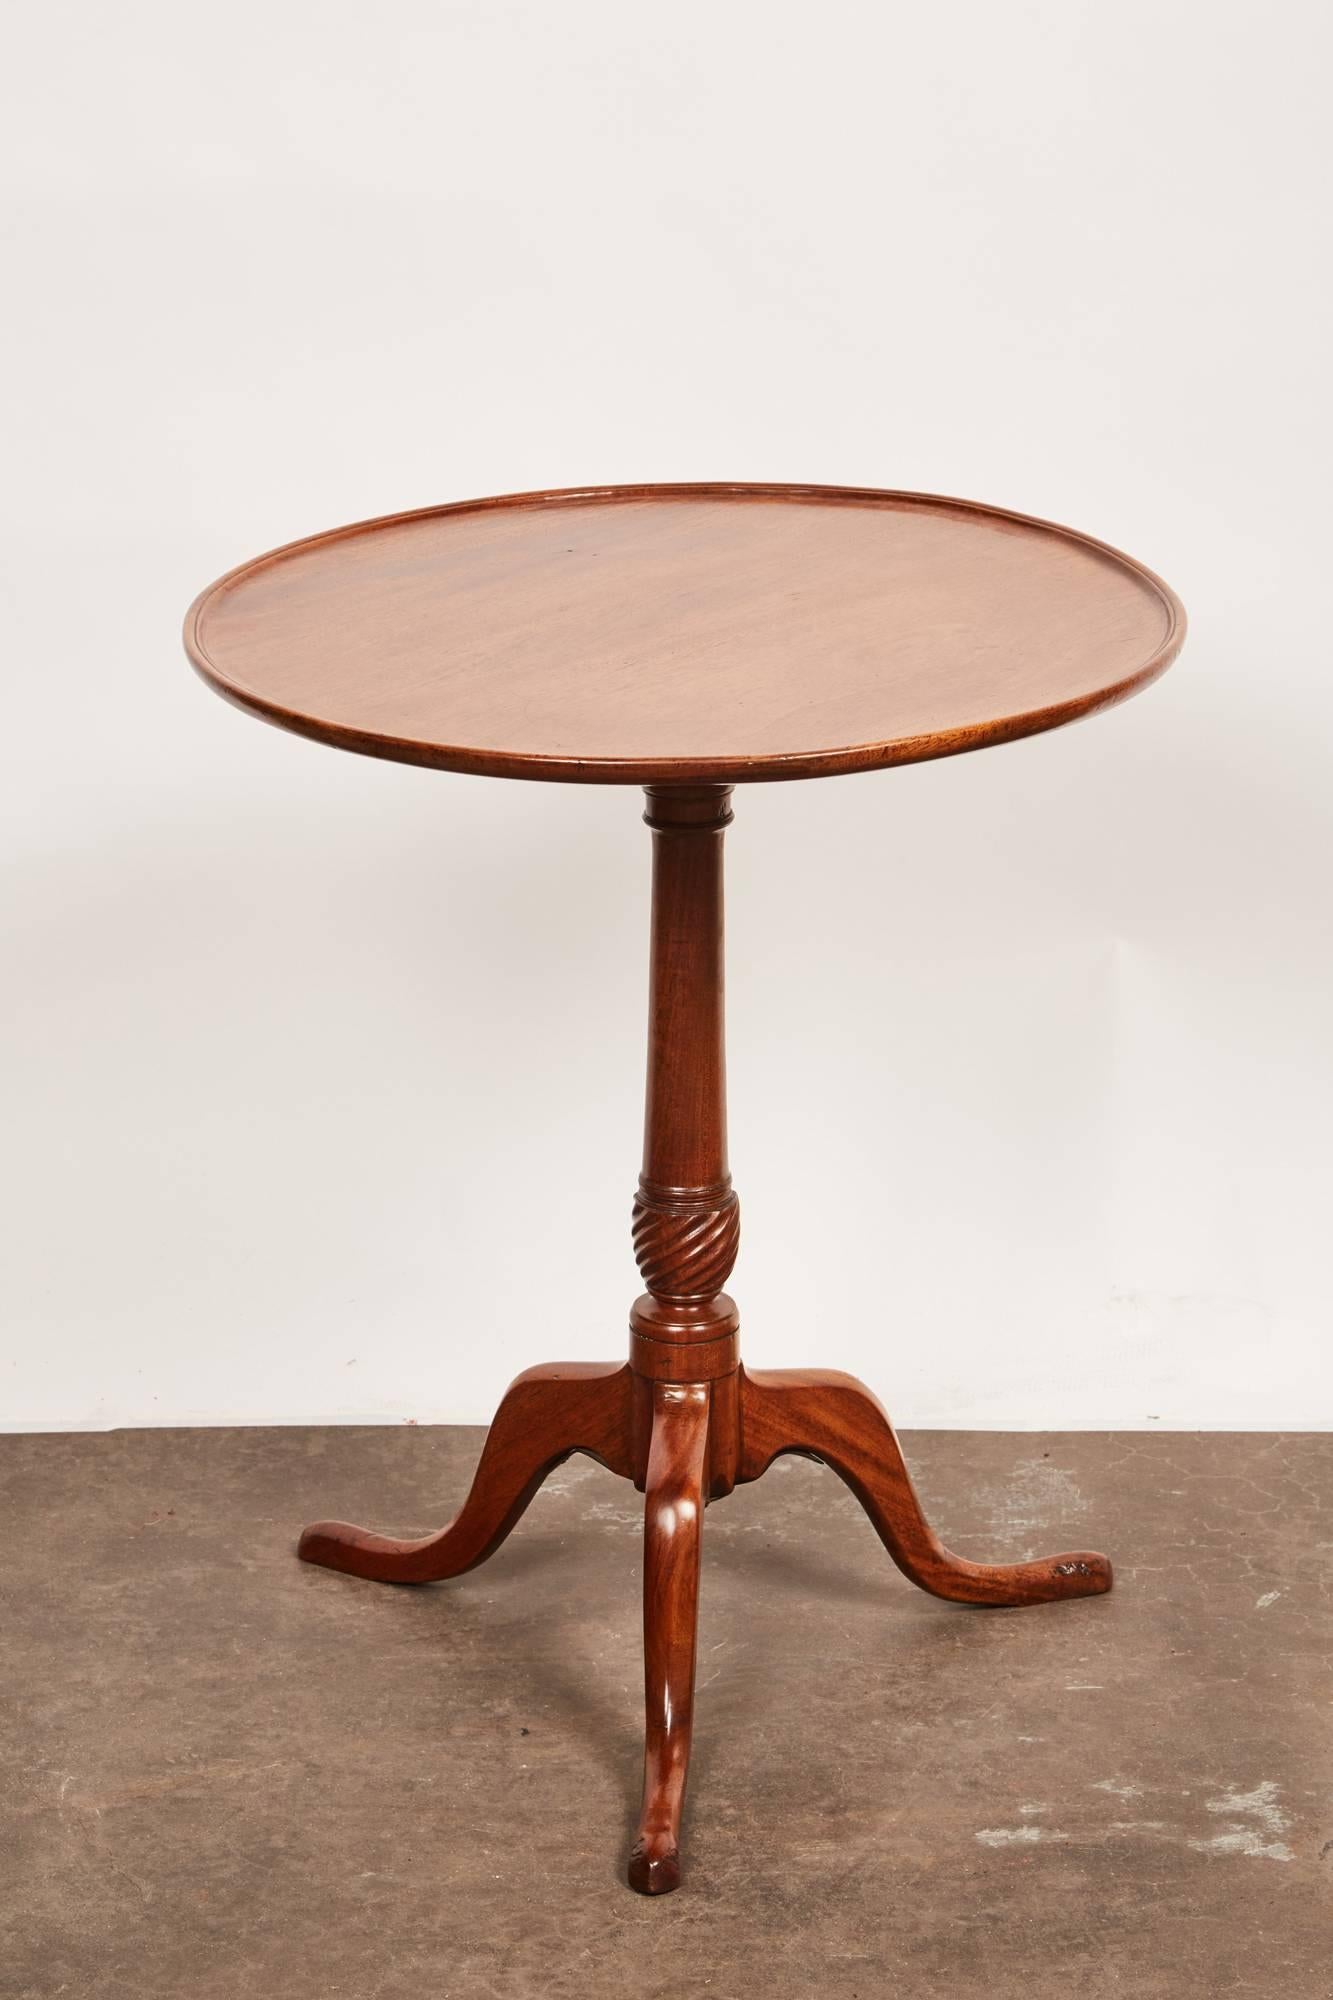 Late 18th Century George III Mahogany Pedestal Table In Good Condition For Sale In Pasadena, CA